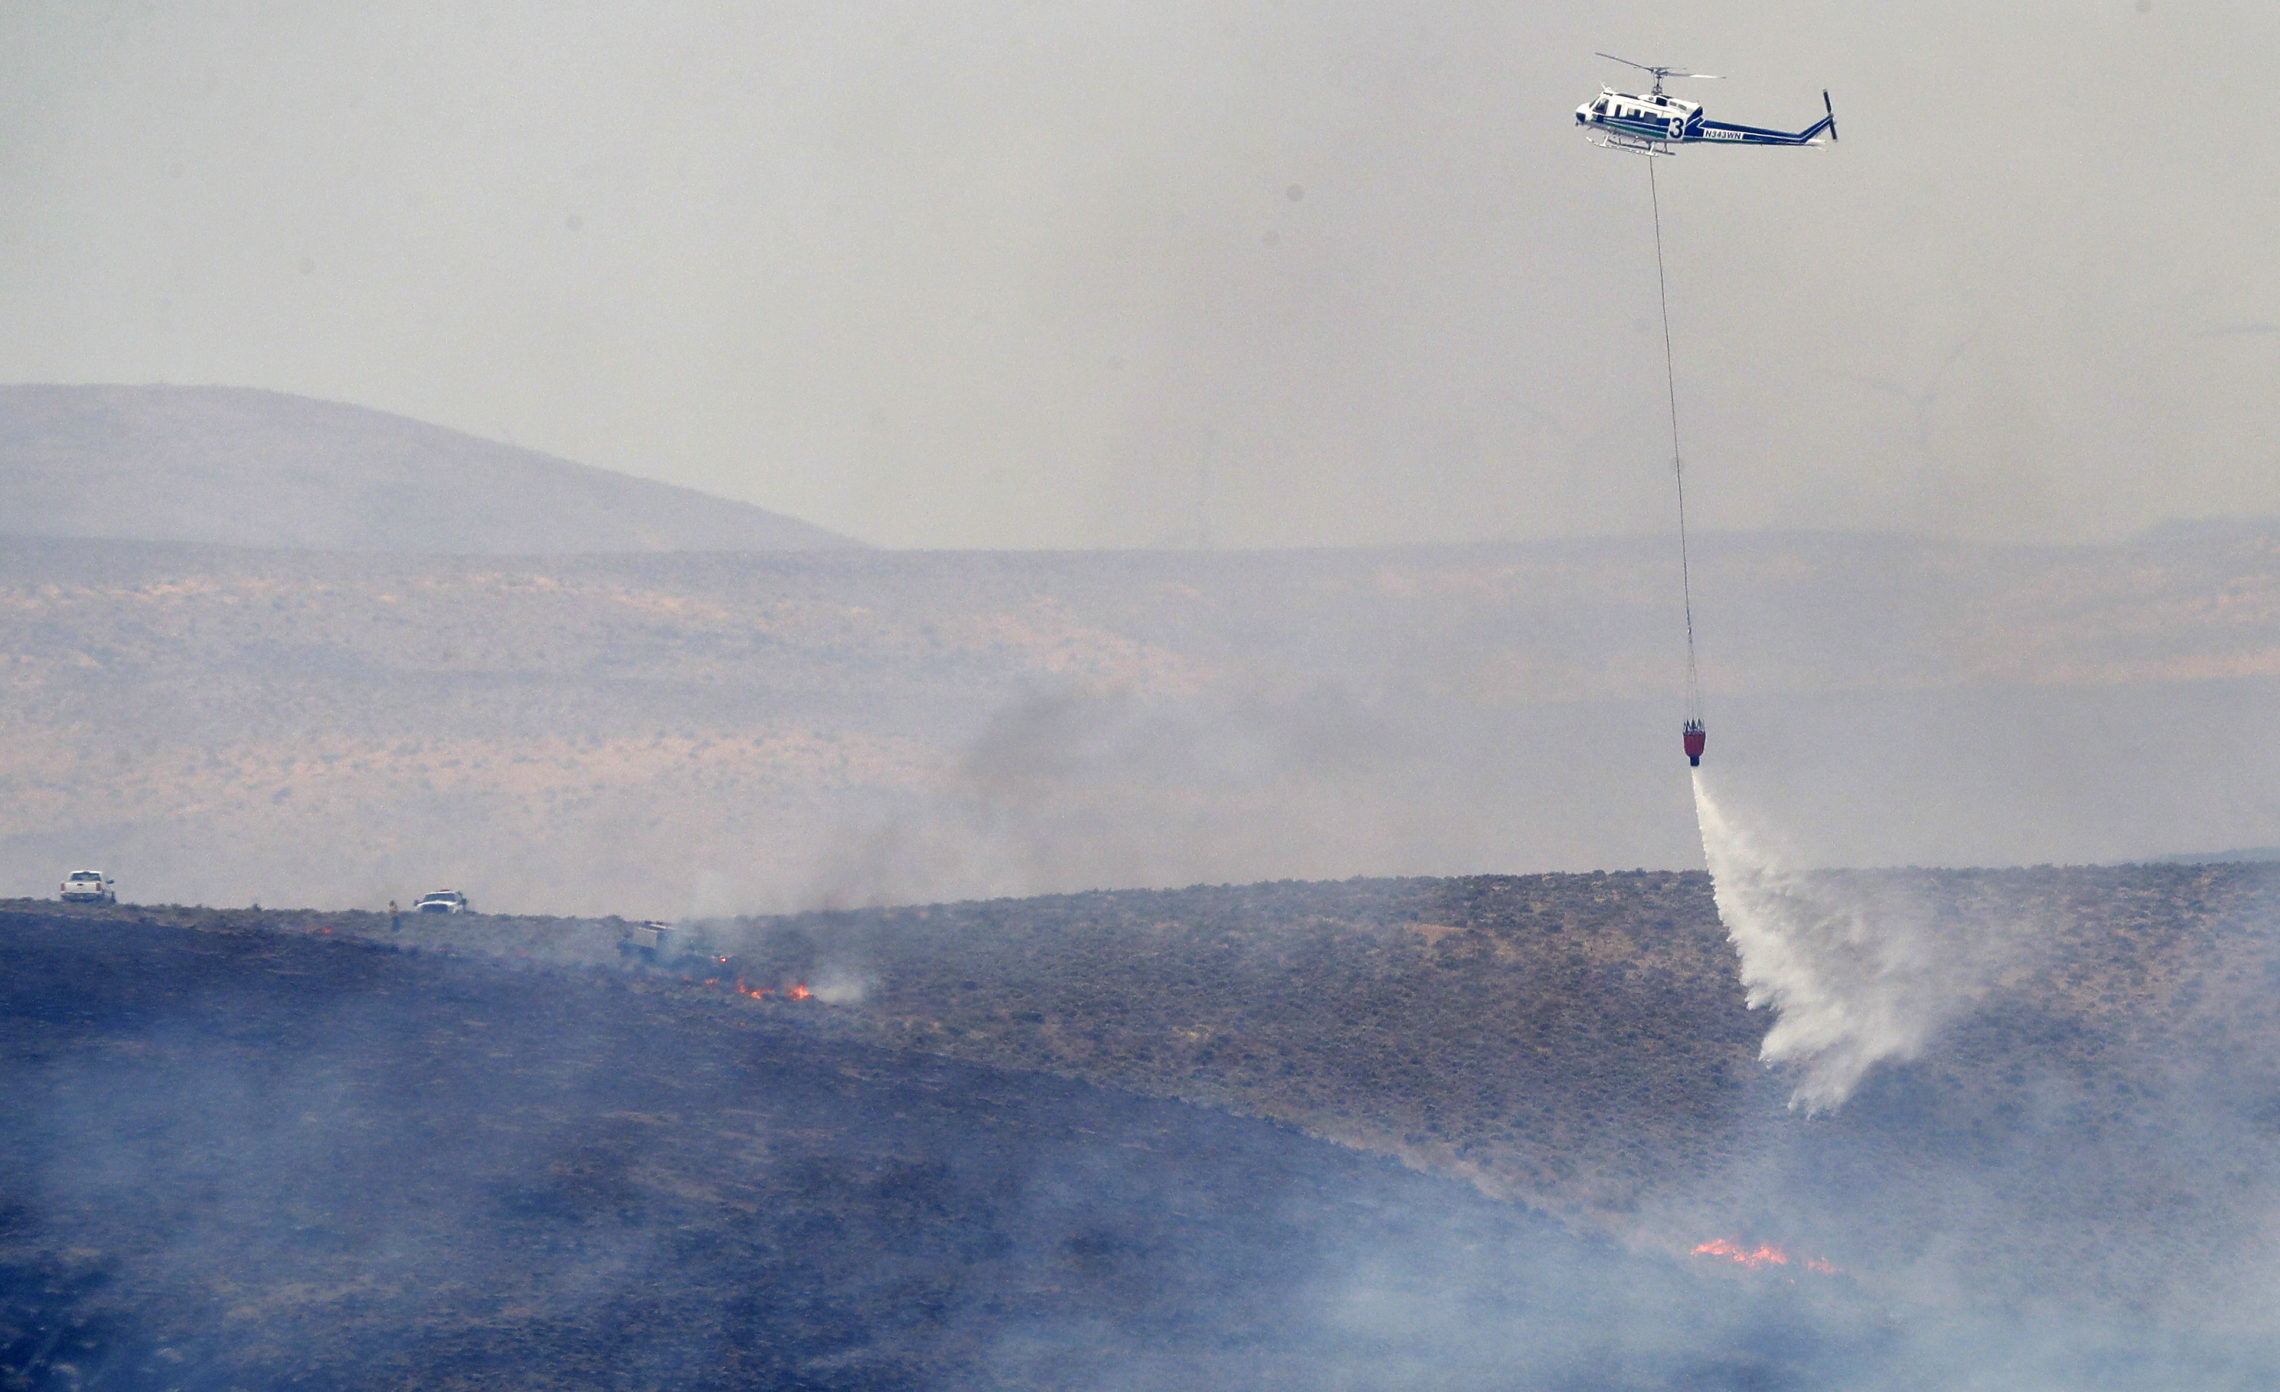 A helicopter uses a bucket to drop water on the Milepost 22 wildfire, Thursday, June 21, 2018, near Vantage, Wash. CREDIT: AP PHOTO/TED S. WARREN